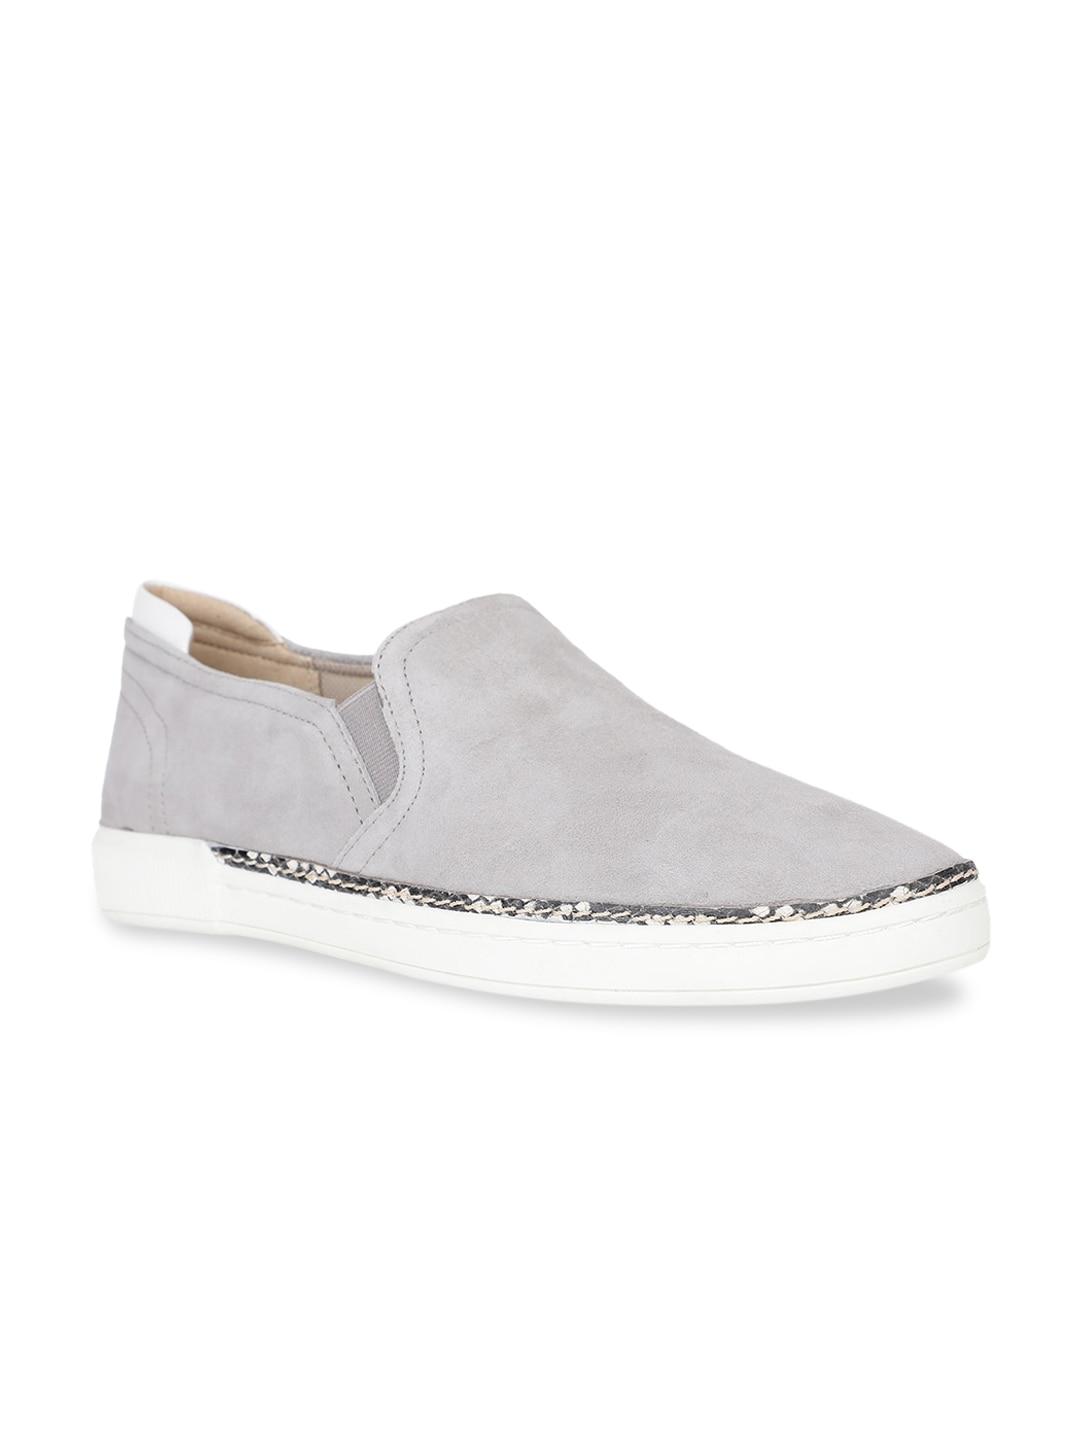 naturalizer-women-grey-solid-leather-slip-on-sneakers